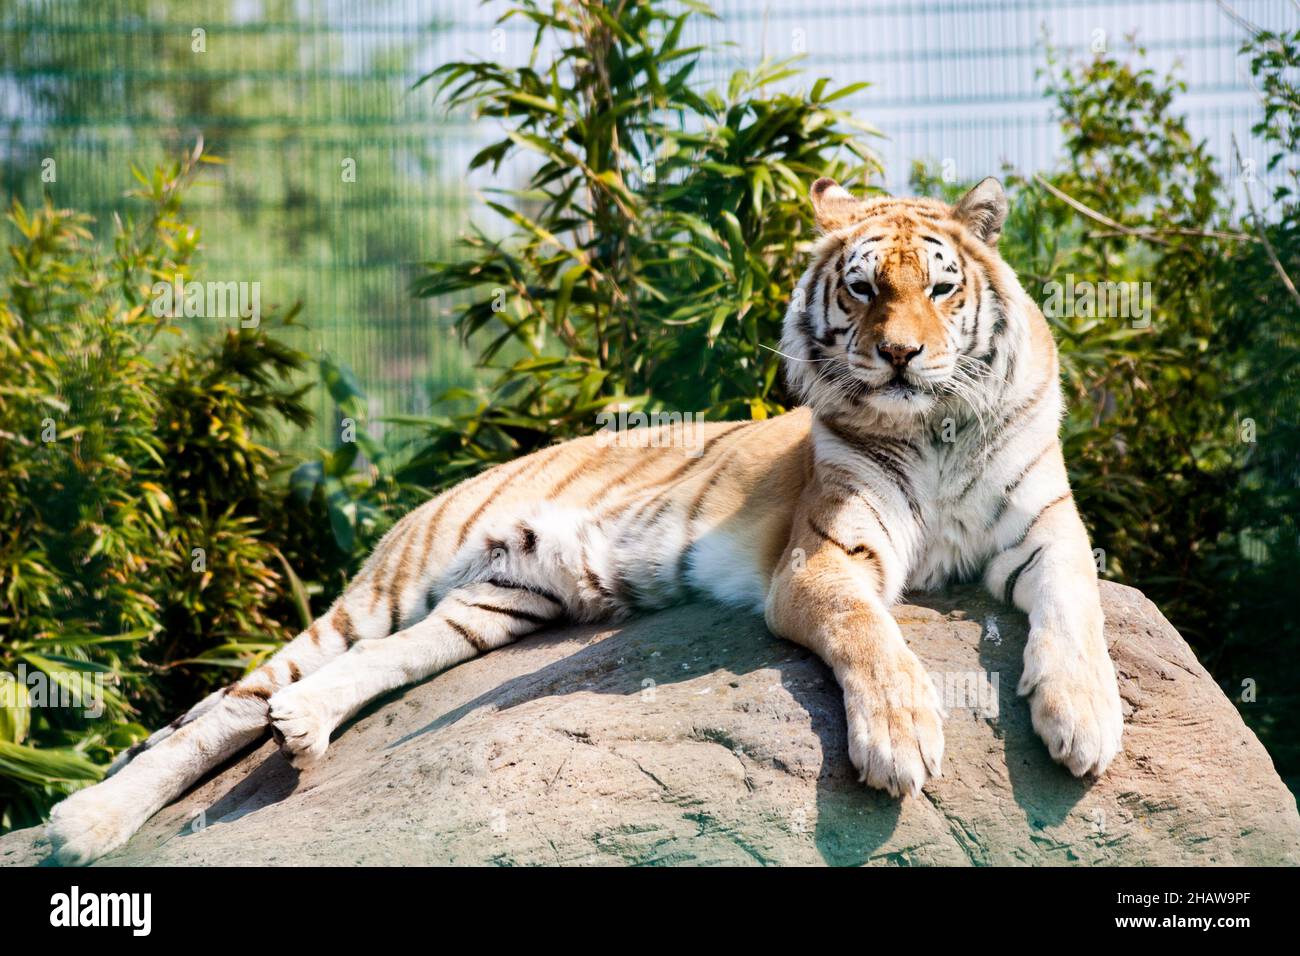 Big tiger lying on a stone in the zoo Stock Photo